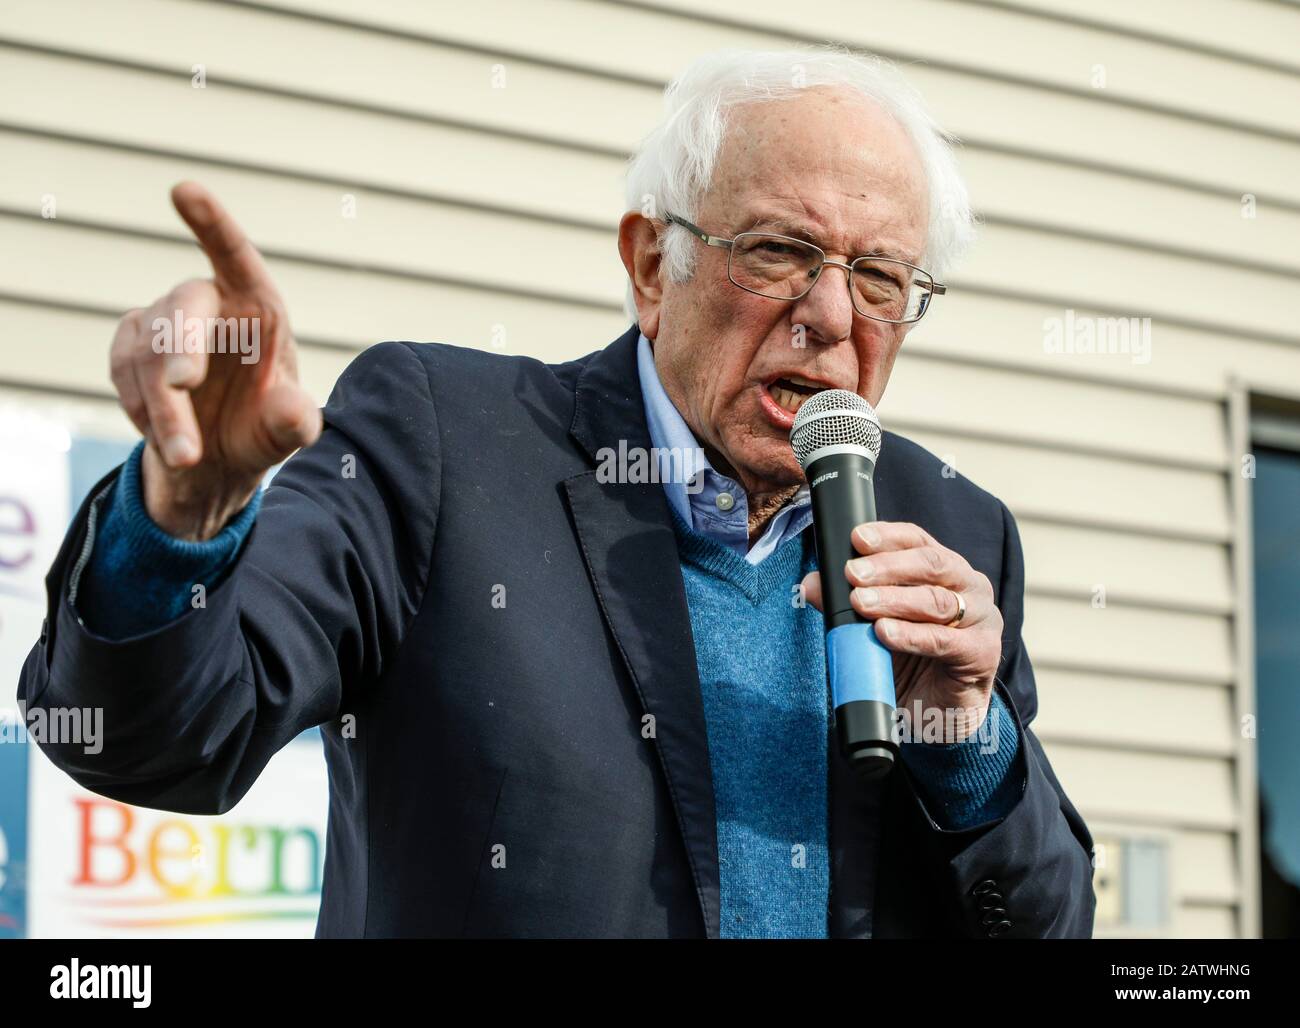 Iowa, USA. 2nd Feb, 2020. Bernie Sanders speaks at a rally at Cedar Rapids, Iowa, the United States, Feb. 2, 2020. Pete Buttigieg, former mayor of South Bend, Indiana, and U.S. Senator Bernie Sanders are leading in the first set of Iowa Democratic caucus results released Tuesday afternoon. Credit: Joel Lerner/Xinhua/Alamy Live News Stock Photo